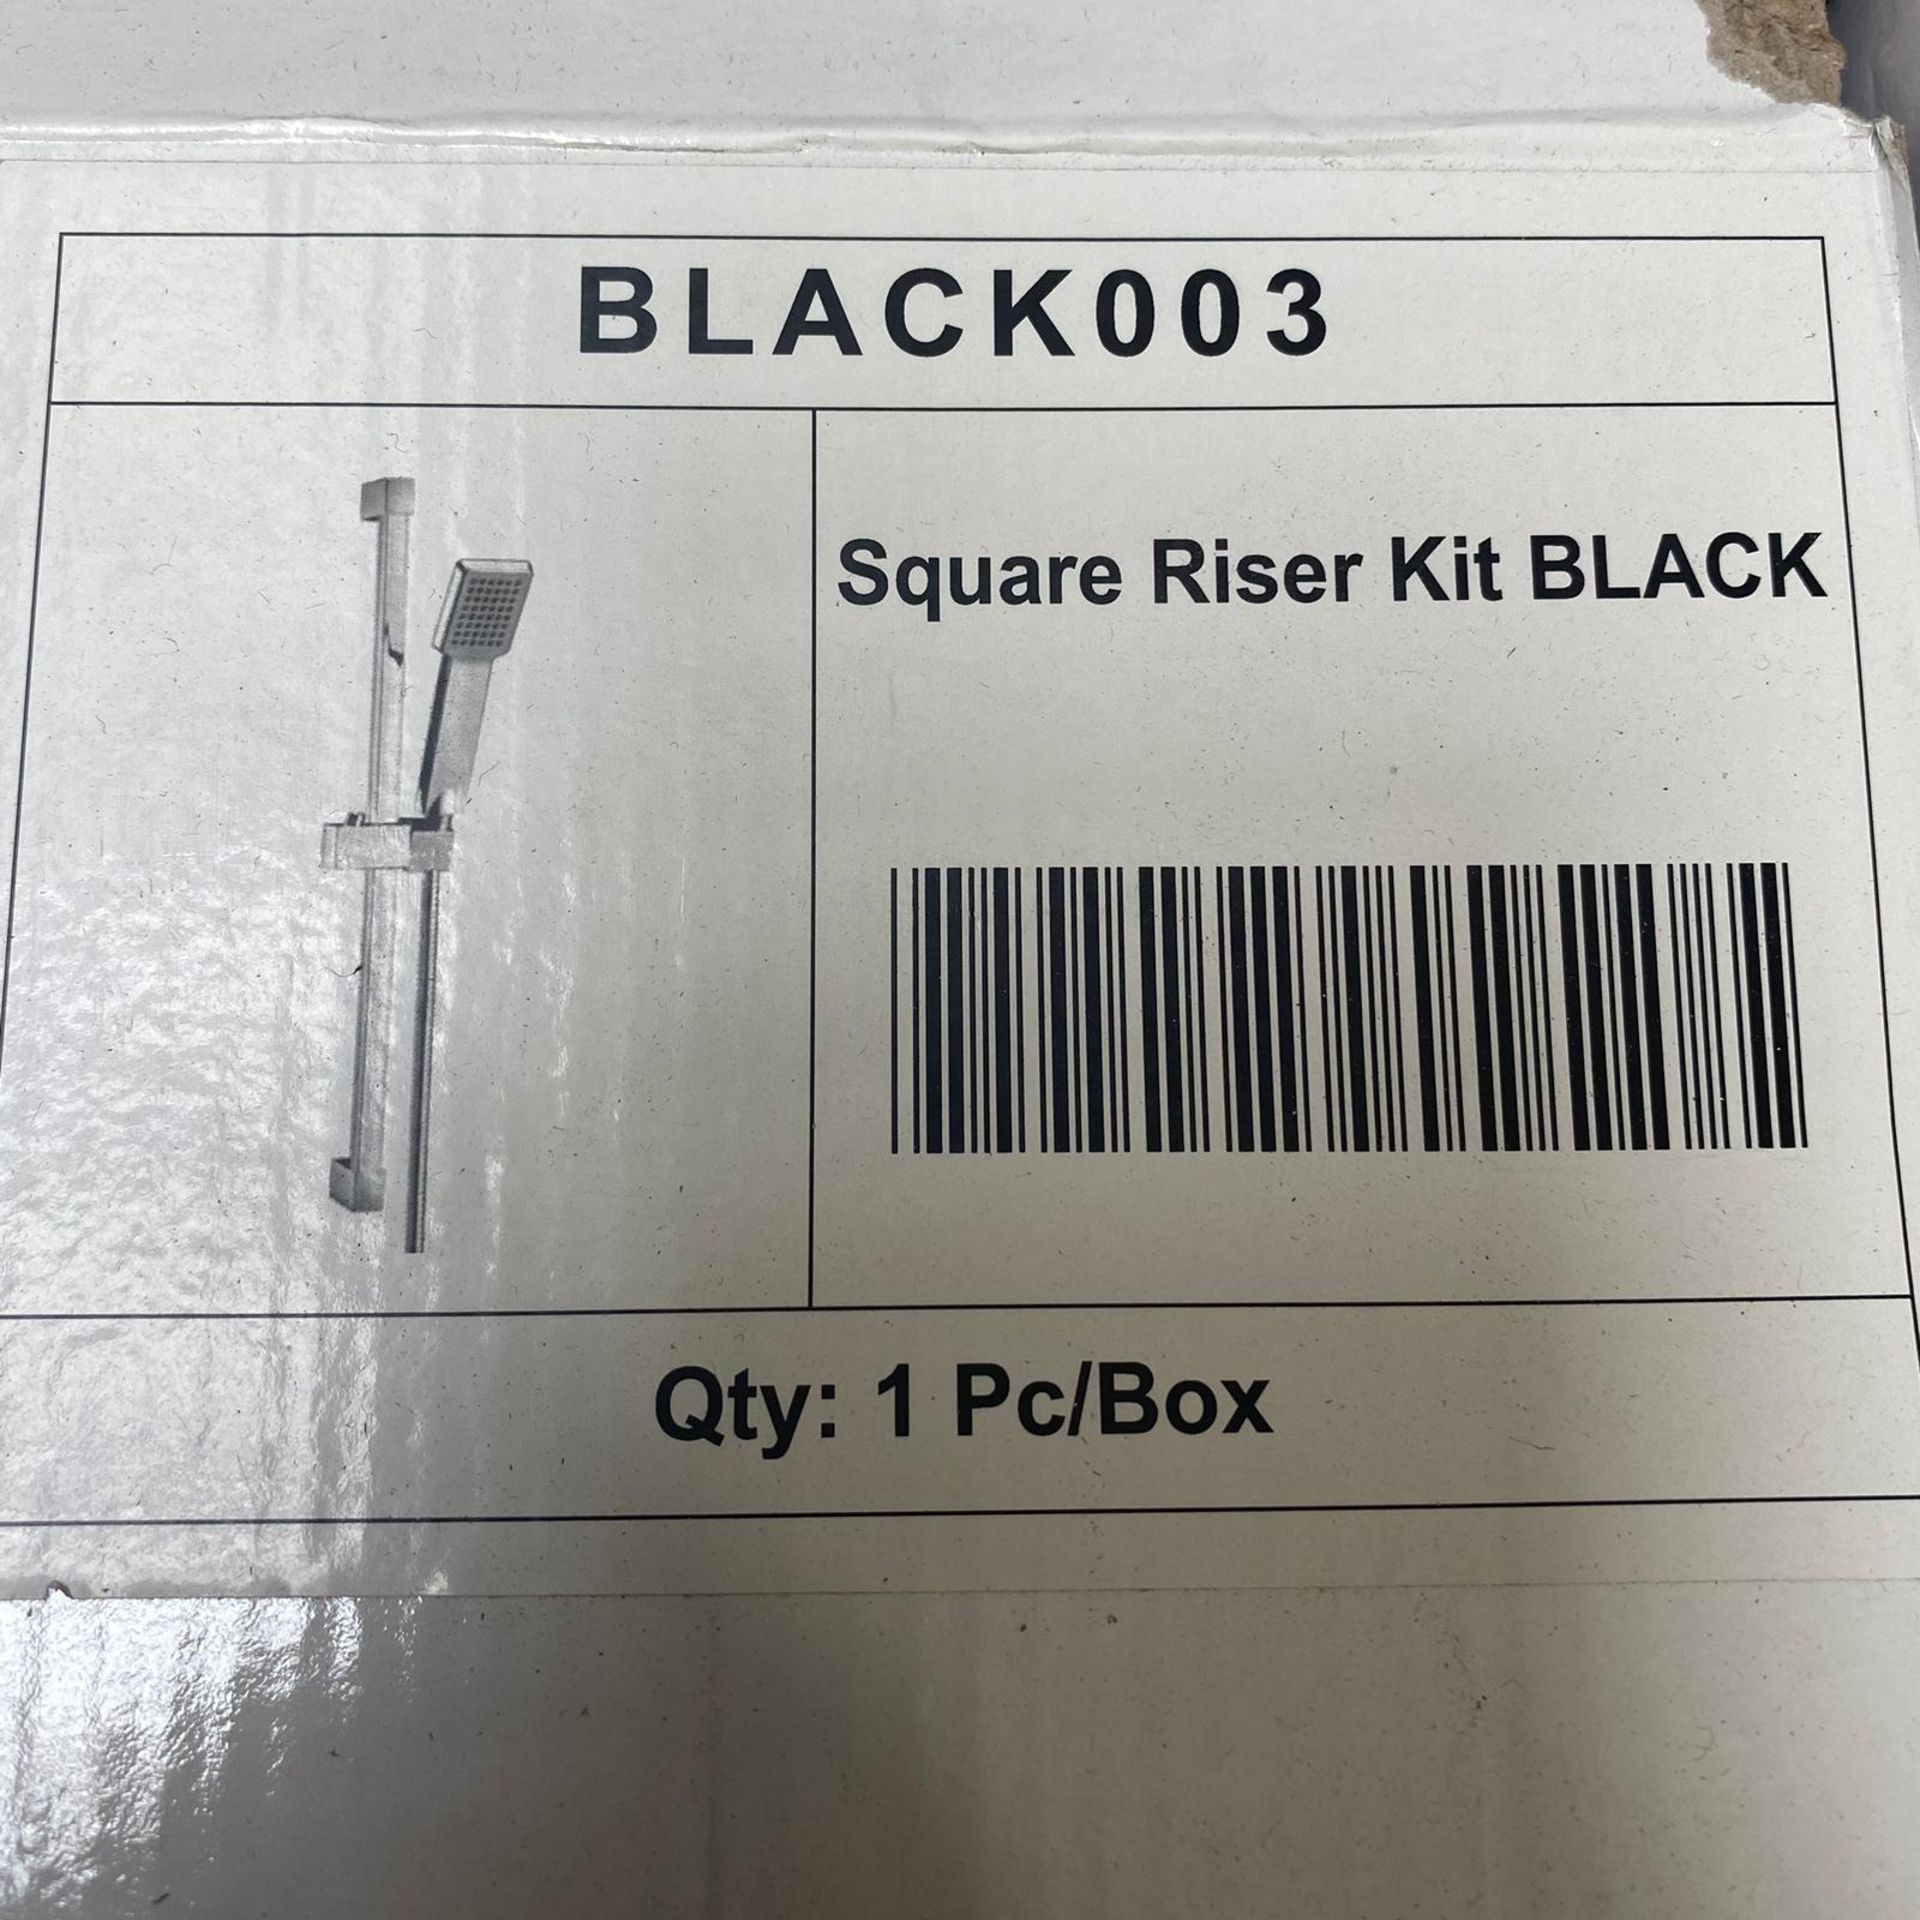 1 x Square Riser Kit In BLACK - Product Code: BLACK003 - New Boxed Stock - CL545 - Original RRP £125 - Image 3 of 3